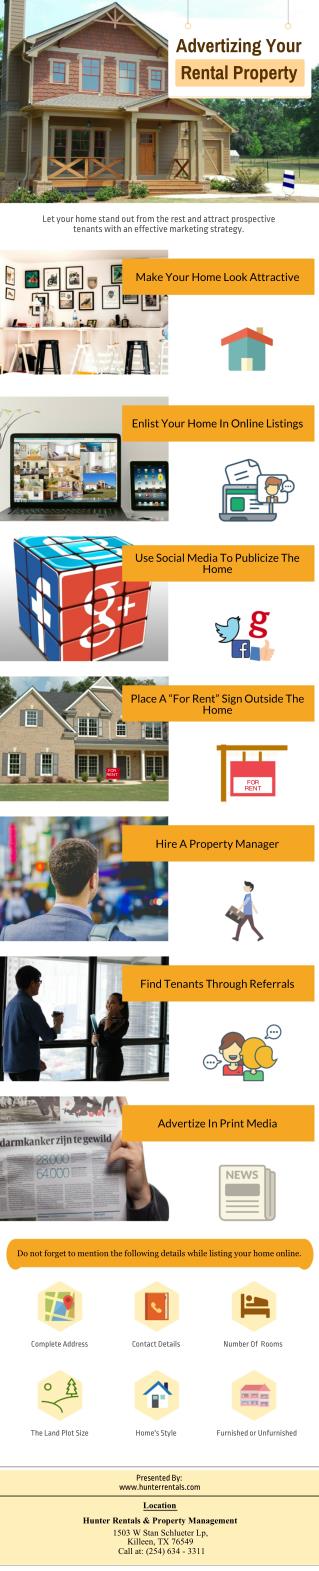 Advertizing Your Home Rental Property